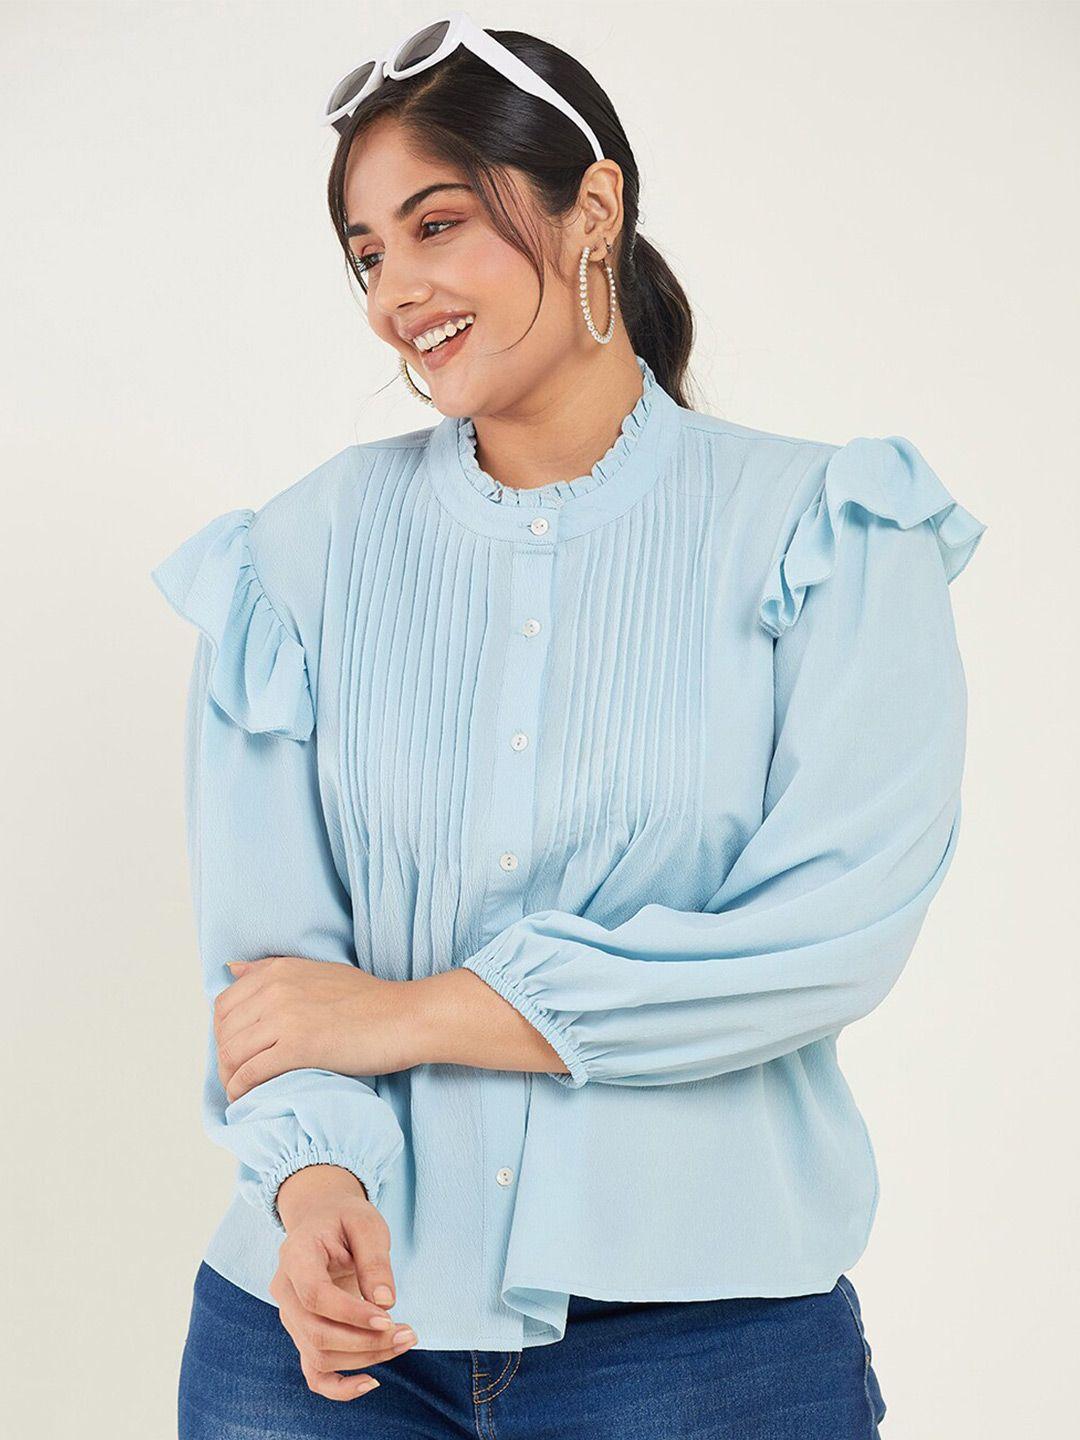 curve by kassually blue high neck puff sleeves shirt style top